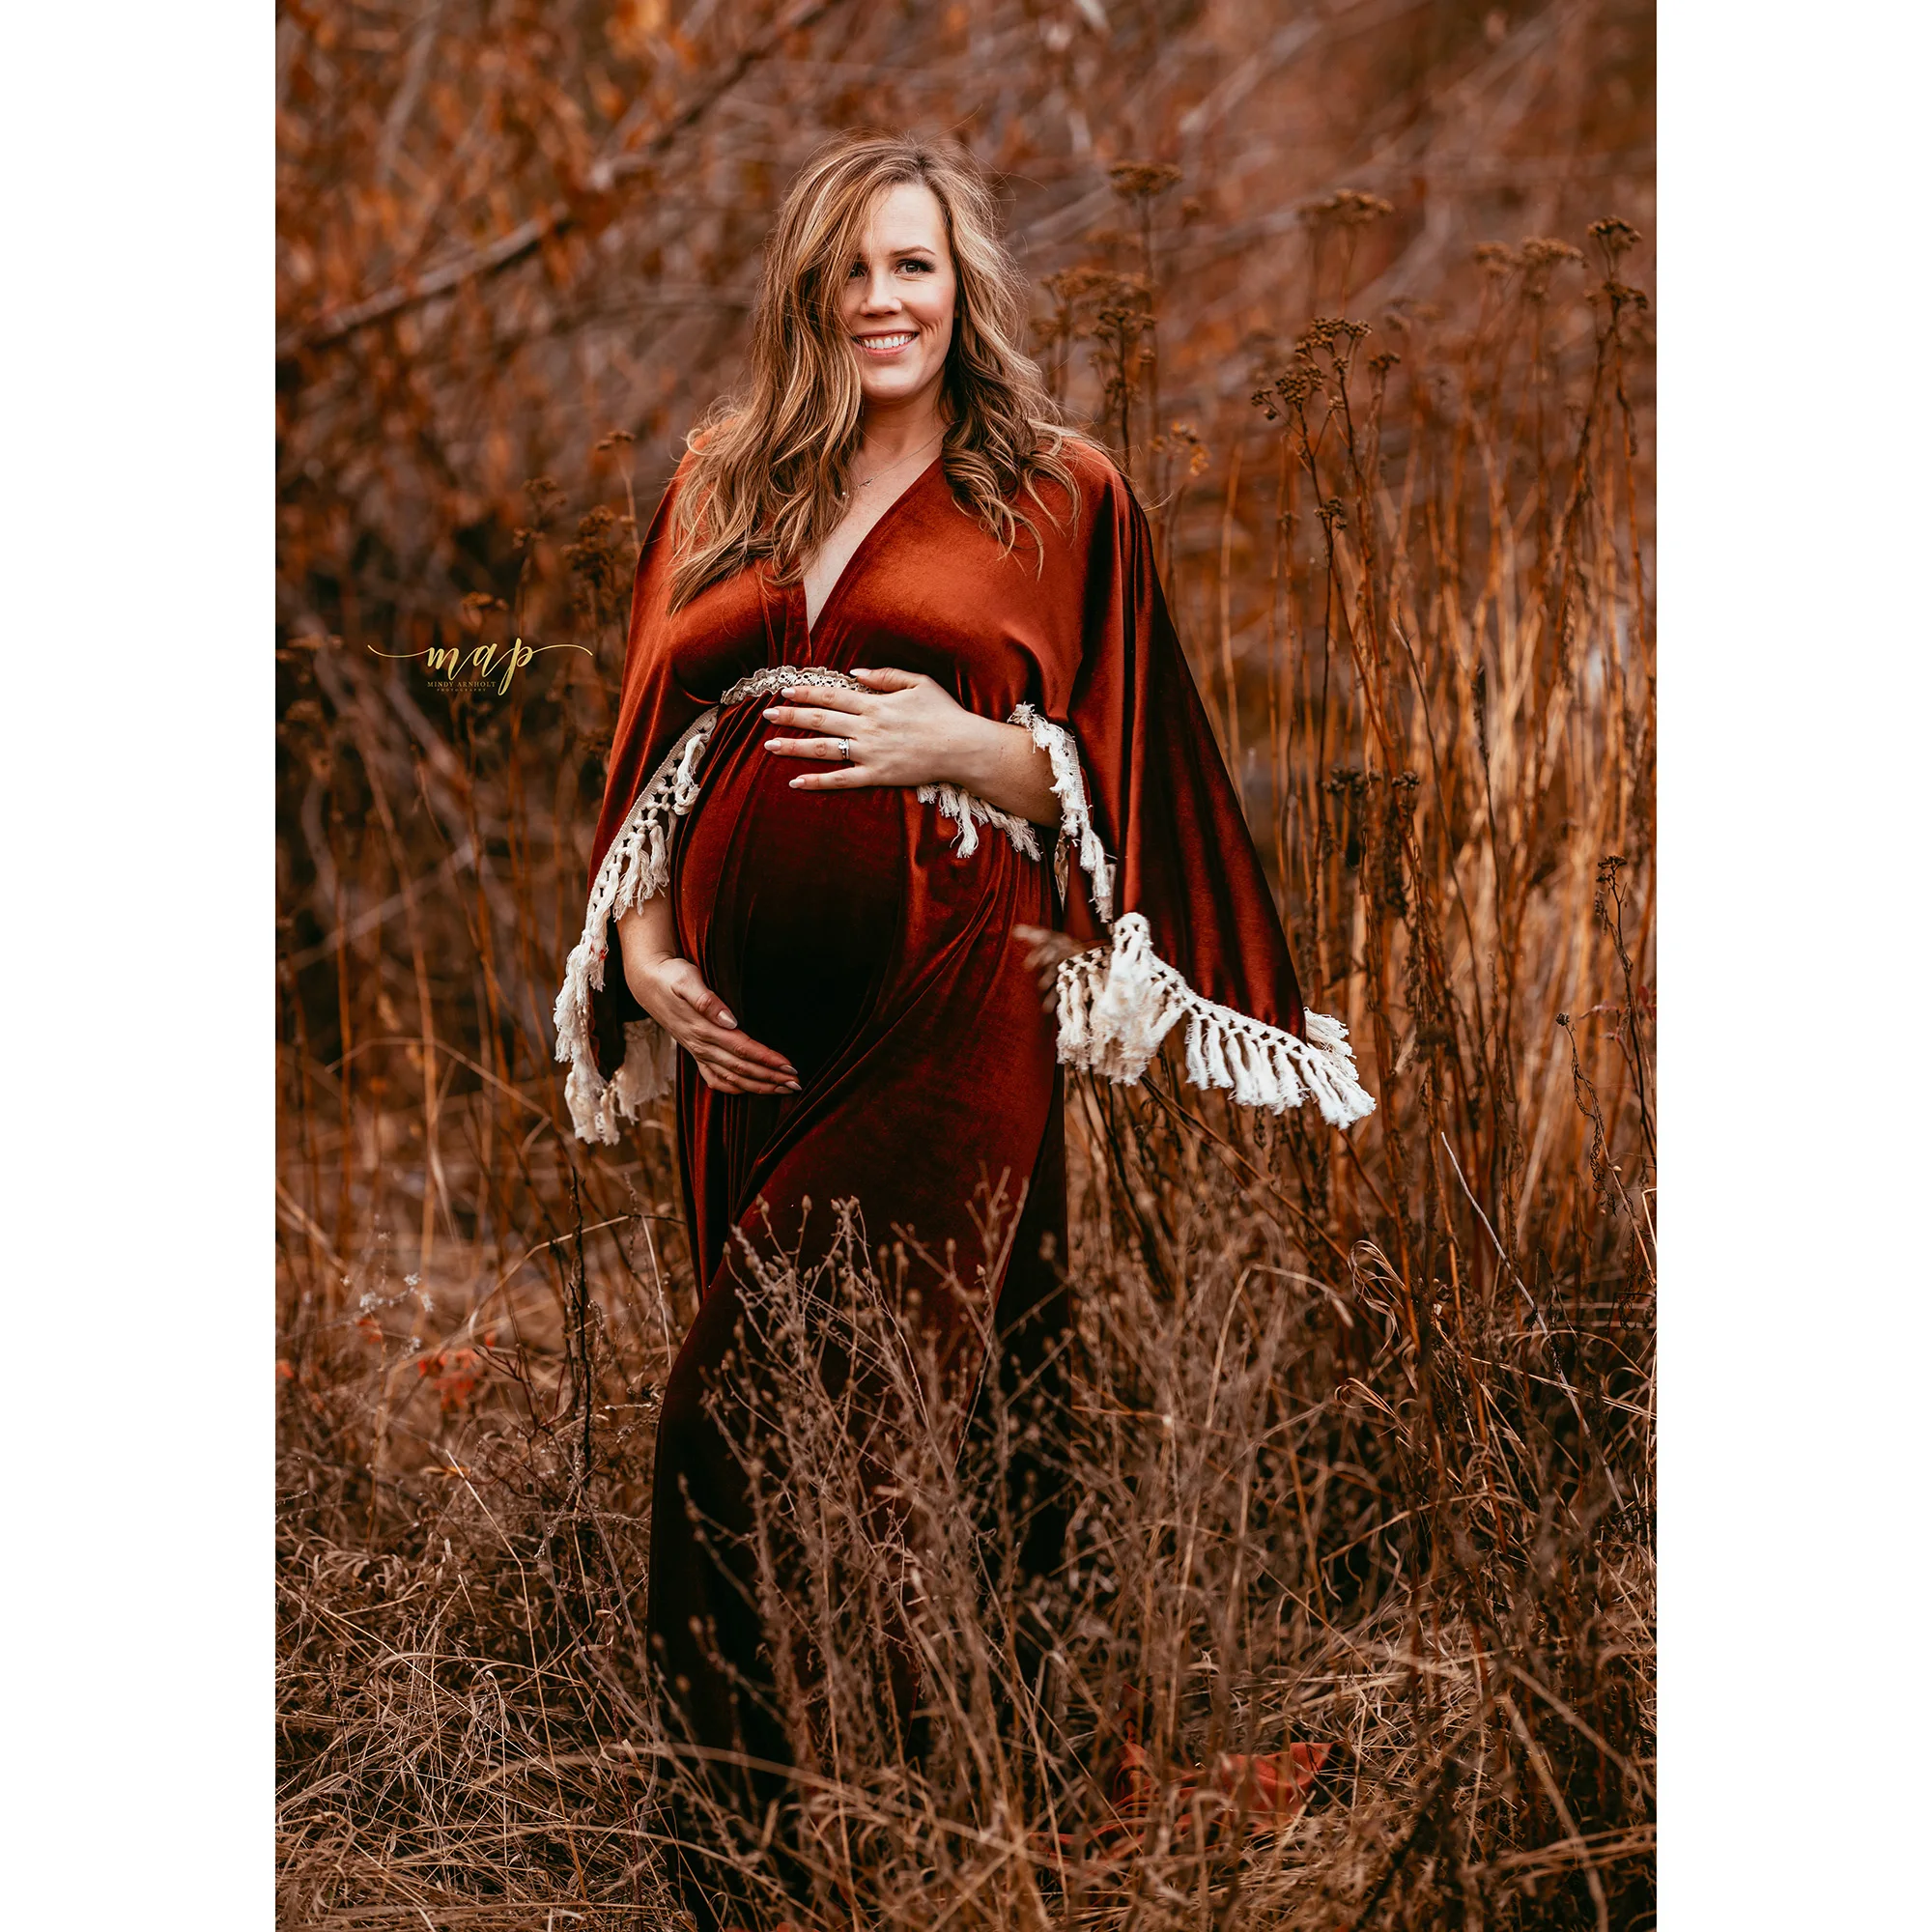 Don&Judy Pregnancy Gown Velvet Boho Maternity Long Dresses Photo Shoot Deep V Woman Clothes Photography Accessories Baby Shower enlarge